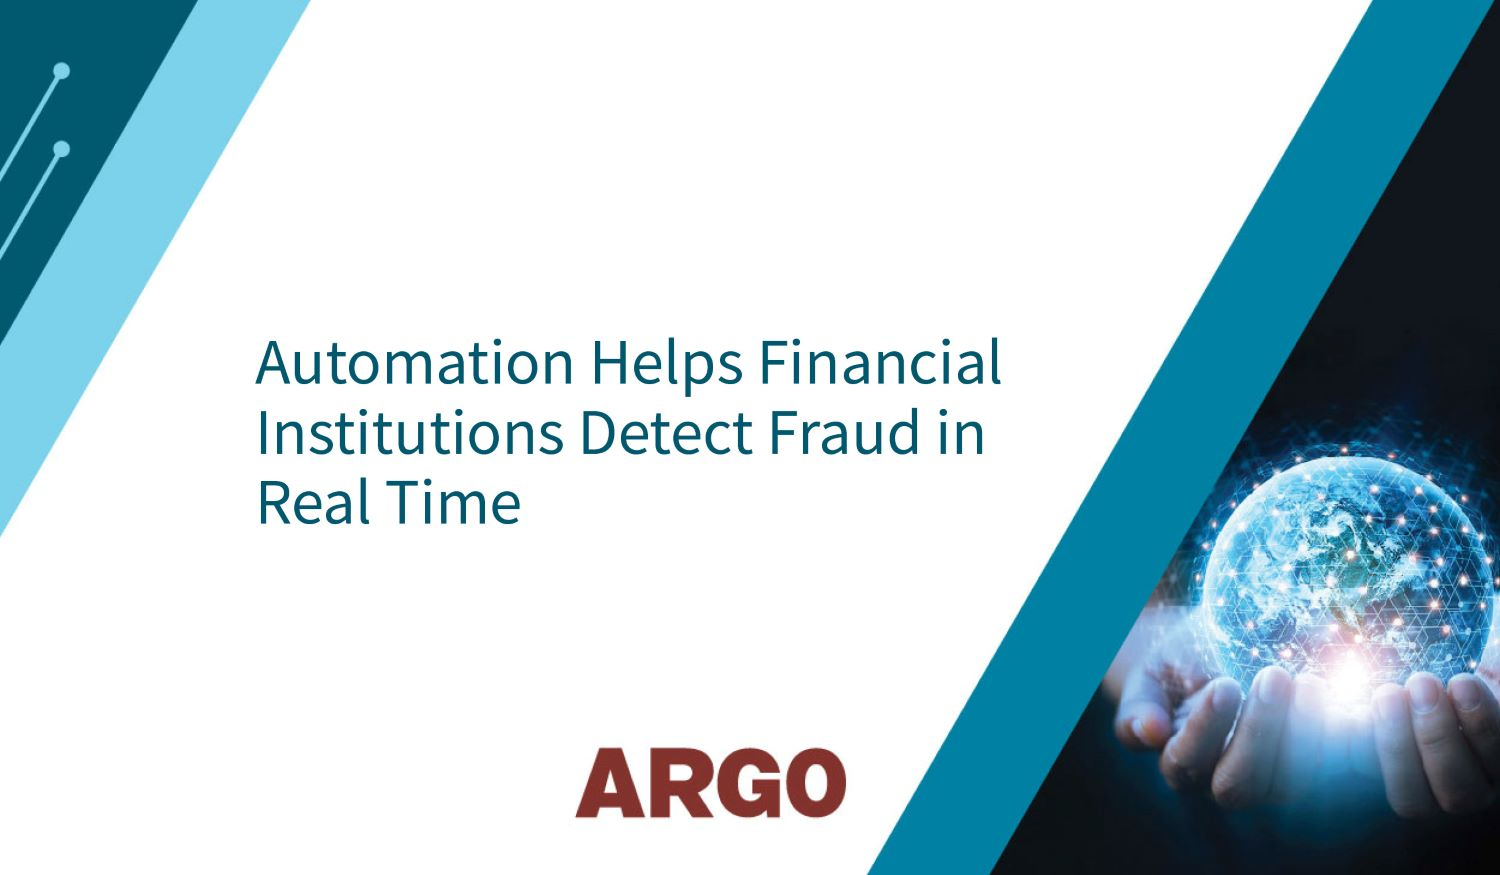 Automation Helps Financial Institutions Detect Fraud in Real Time